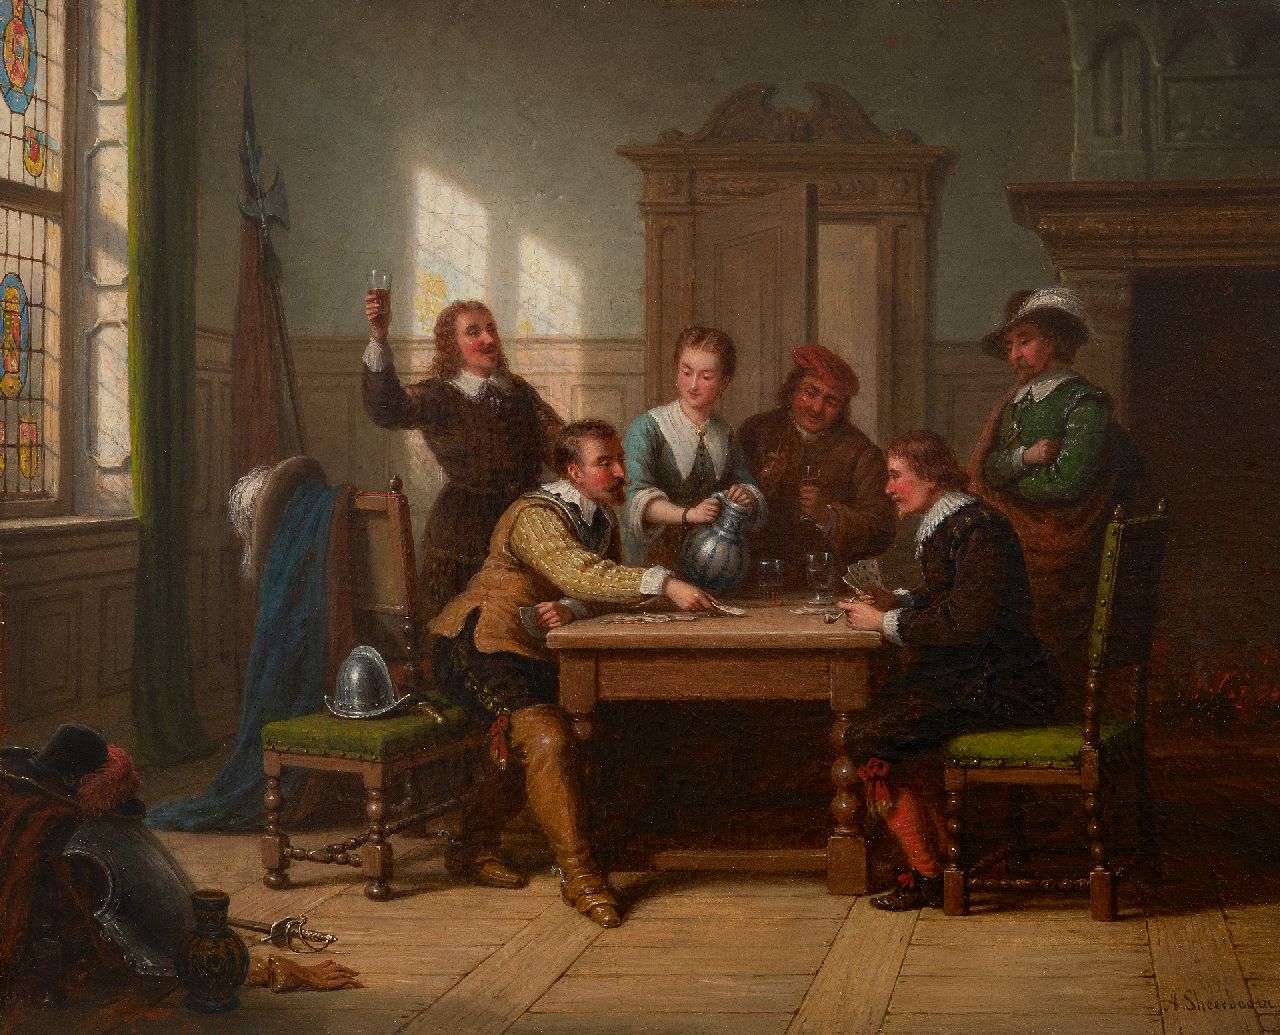 Scheerboom A.  | Andries Scheerboom | Paintings offered for sale | Soldiers drinking and playing card games, oil on canvas 43.7 x 54.1 cm, signed l.r.